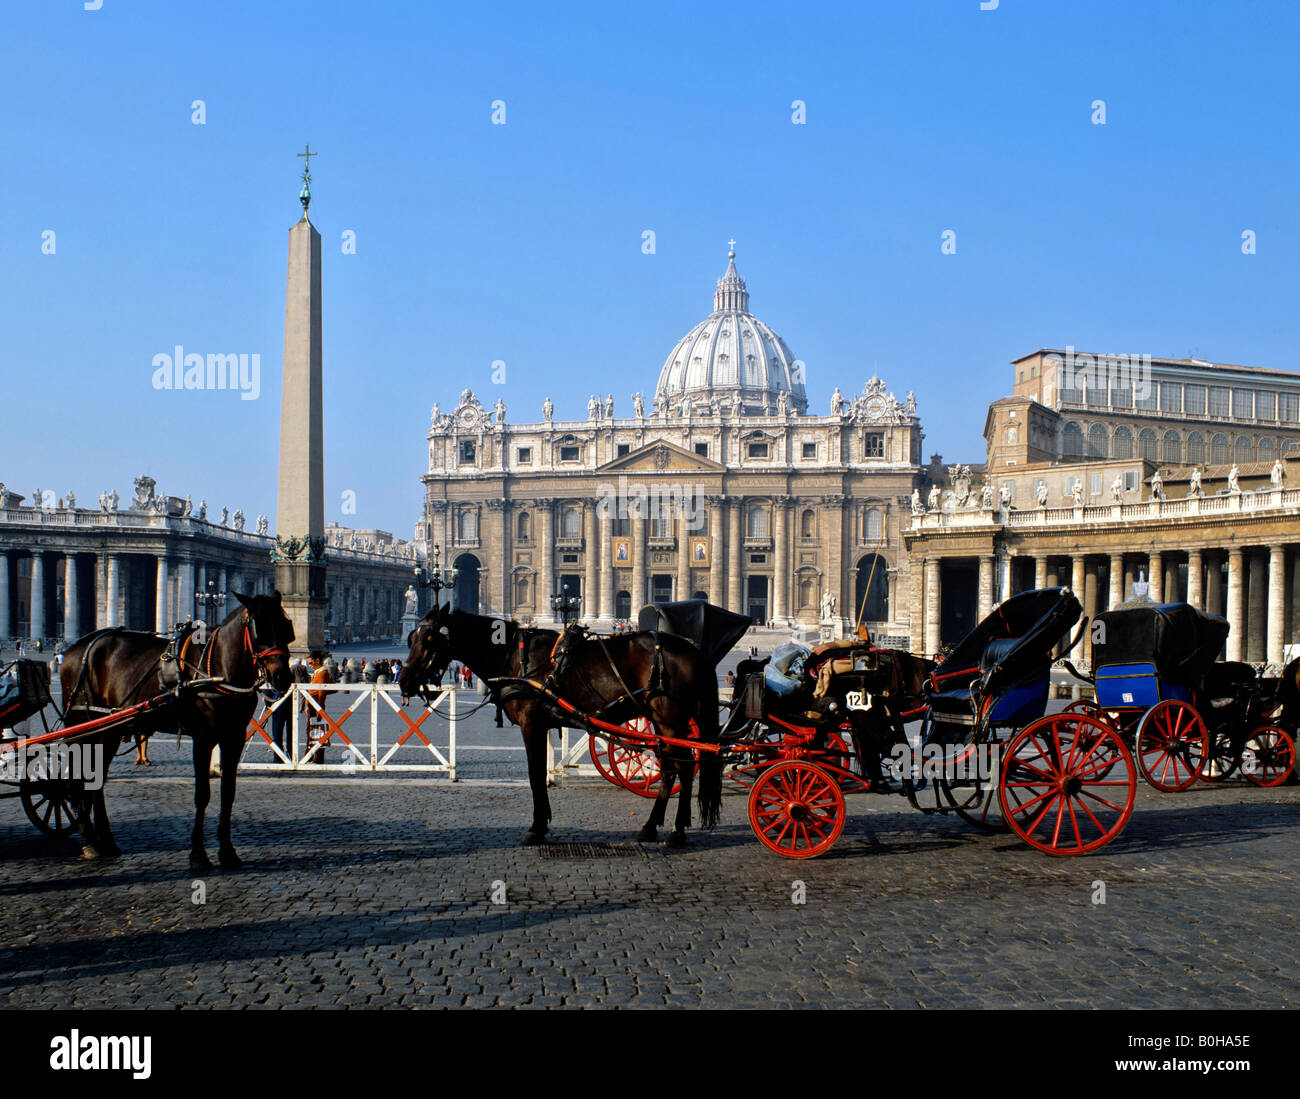 Horse and buggy in front of St. Peter's Basilica, main facade, Vatican City, Rome, Italy Stock Photo